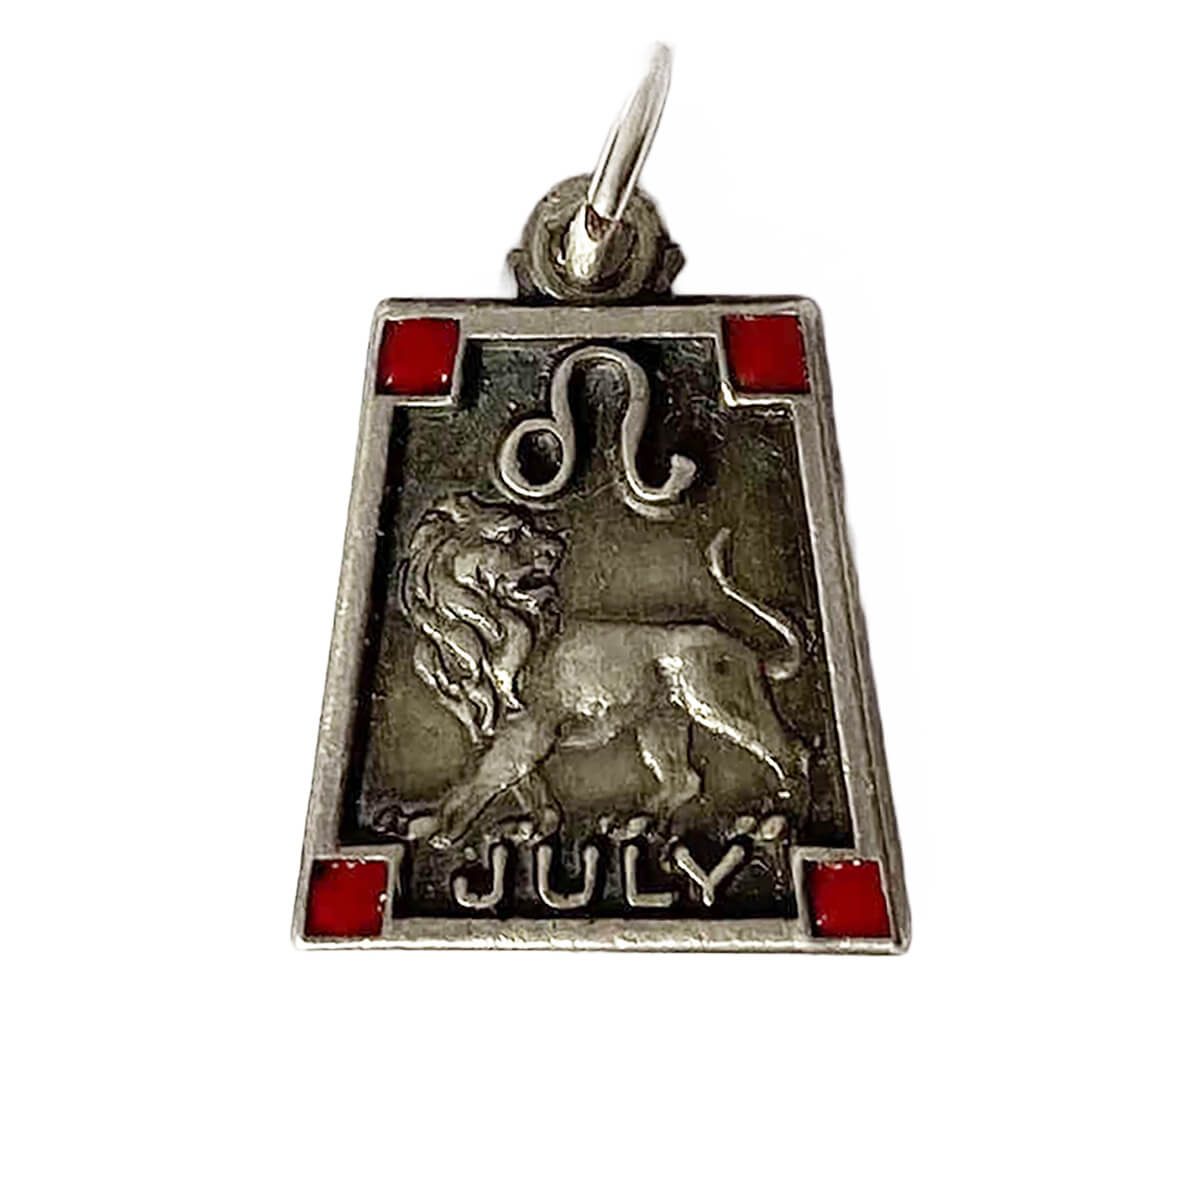 Vintage sterling silver star sign 1940s July birthday charm trapezoid zodiac pendant